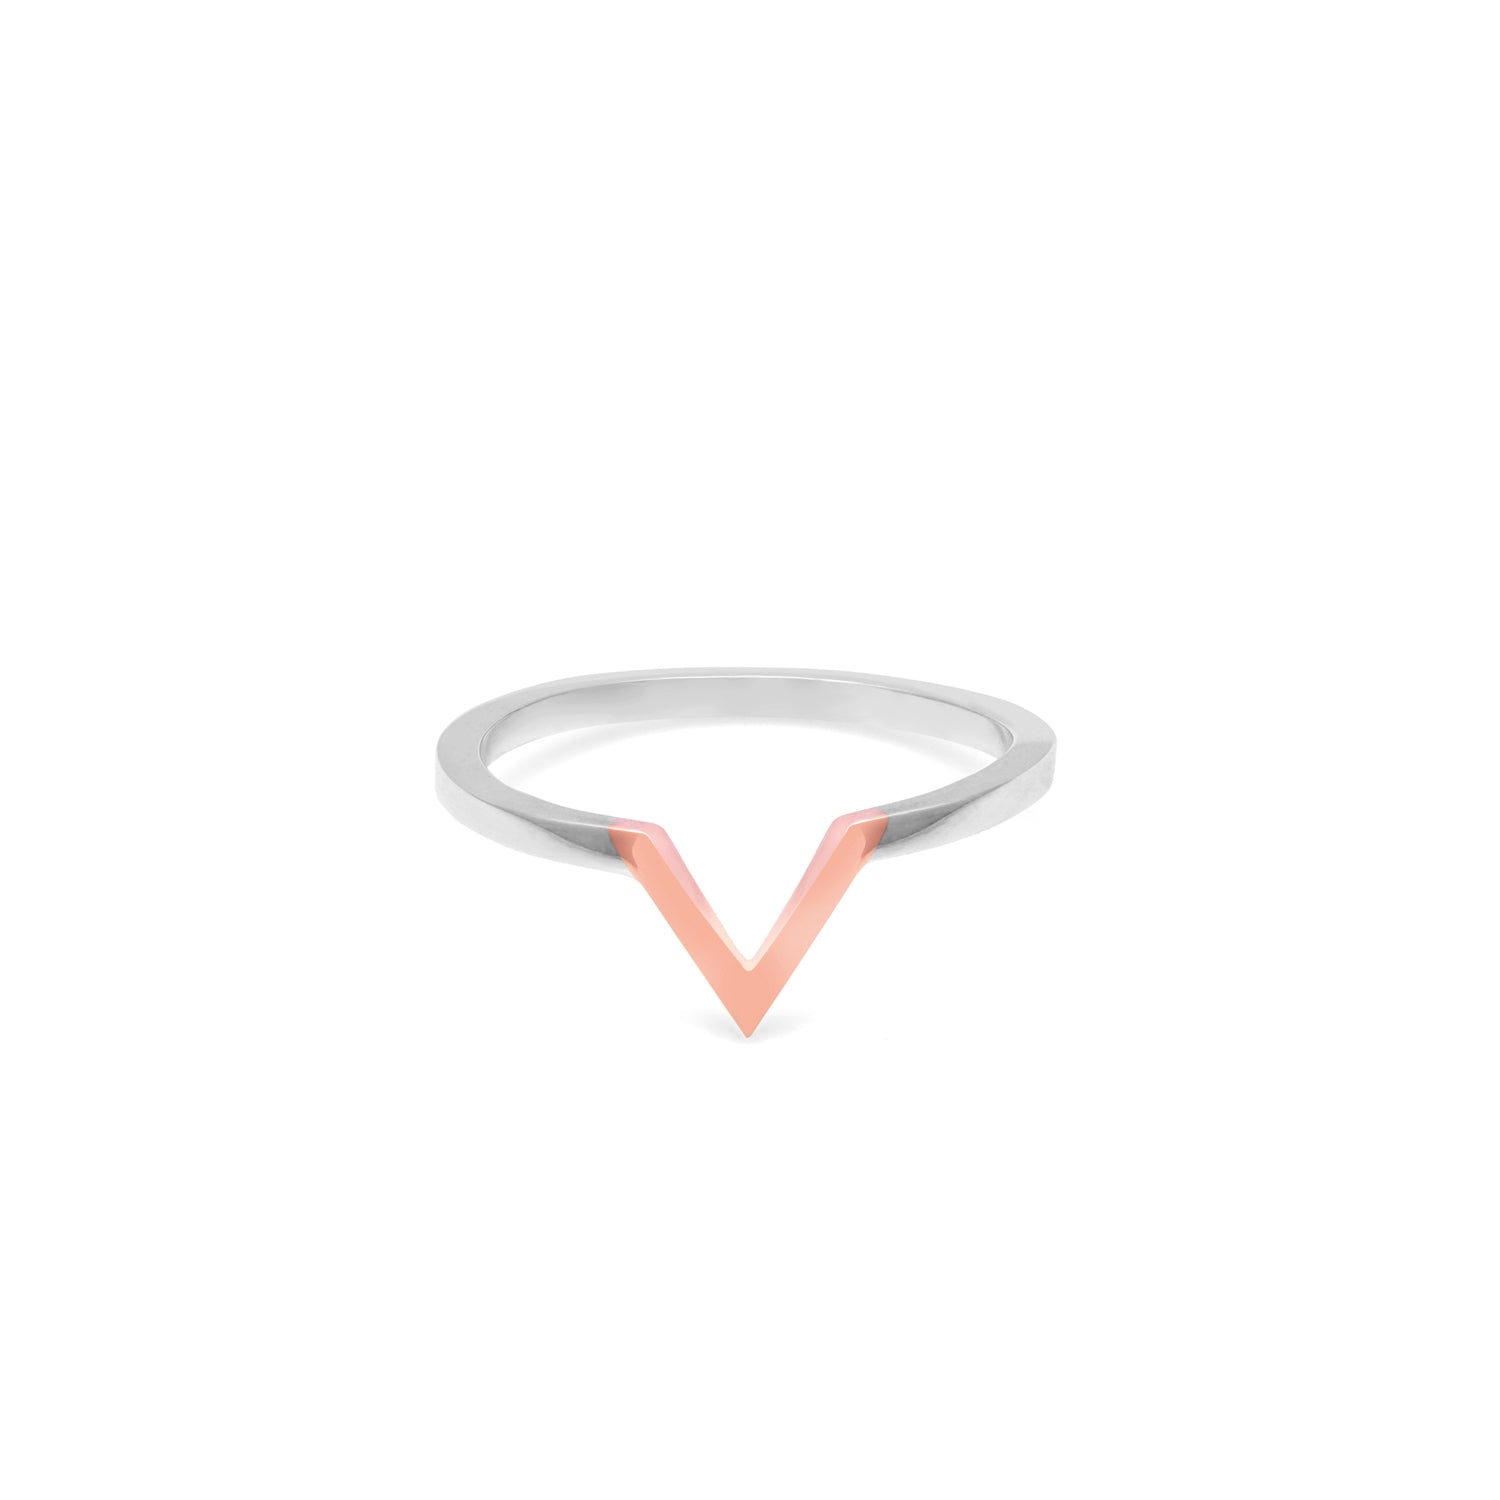 Two-tone Triangle Ring - 9k Rose Gold & Silver - Myia Bonner Jewellery